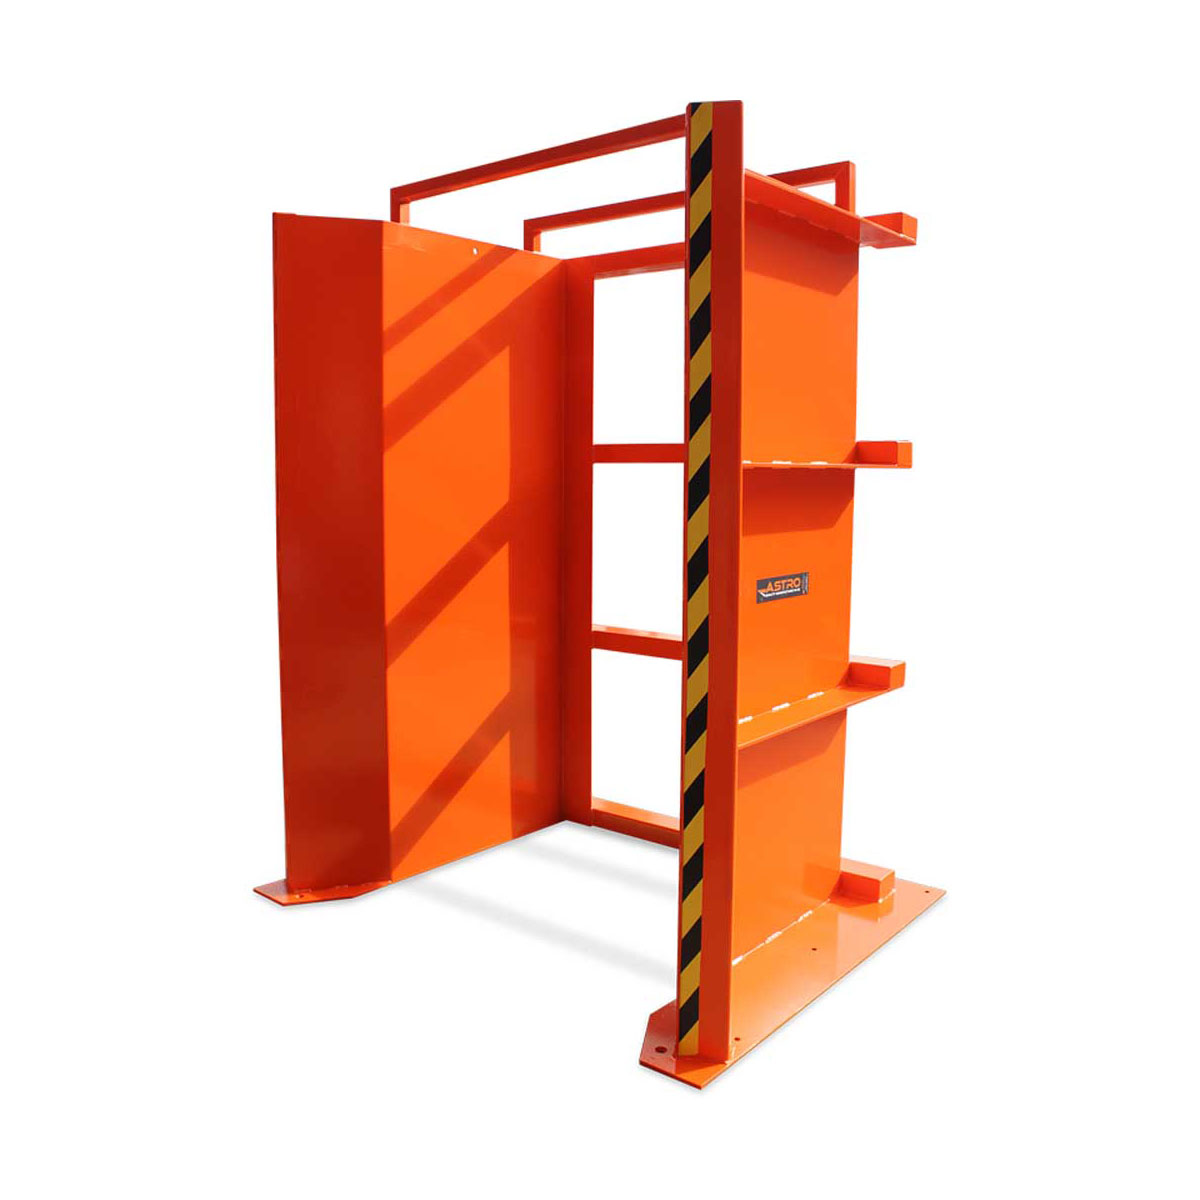 Buy Manual Pallet Straightener available at Astrolift NZ